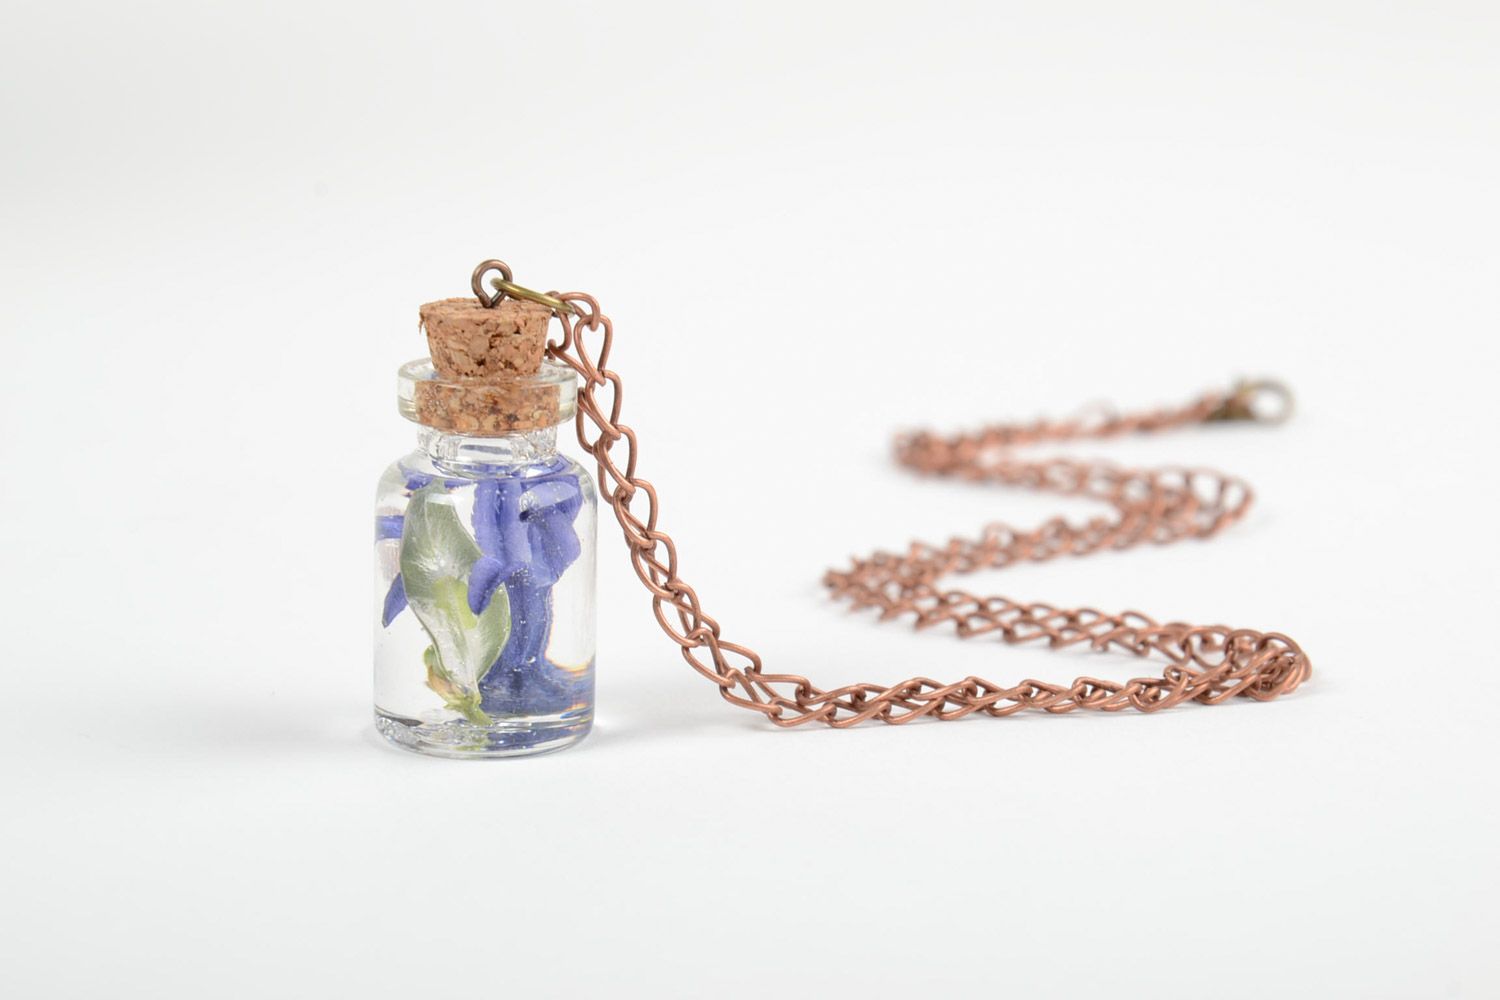 Handmade epoxy resin pendant with real flowers inside in the shape of vial photo 4